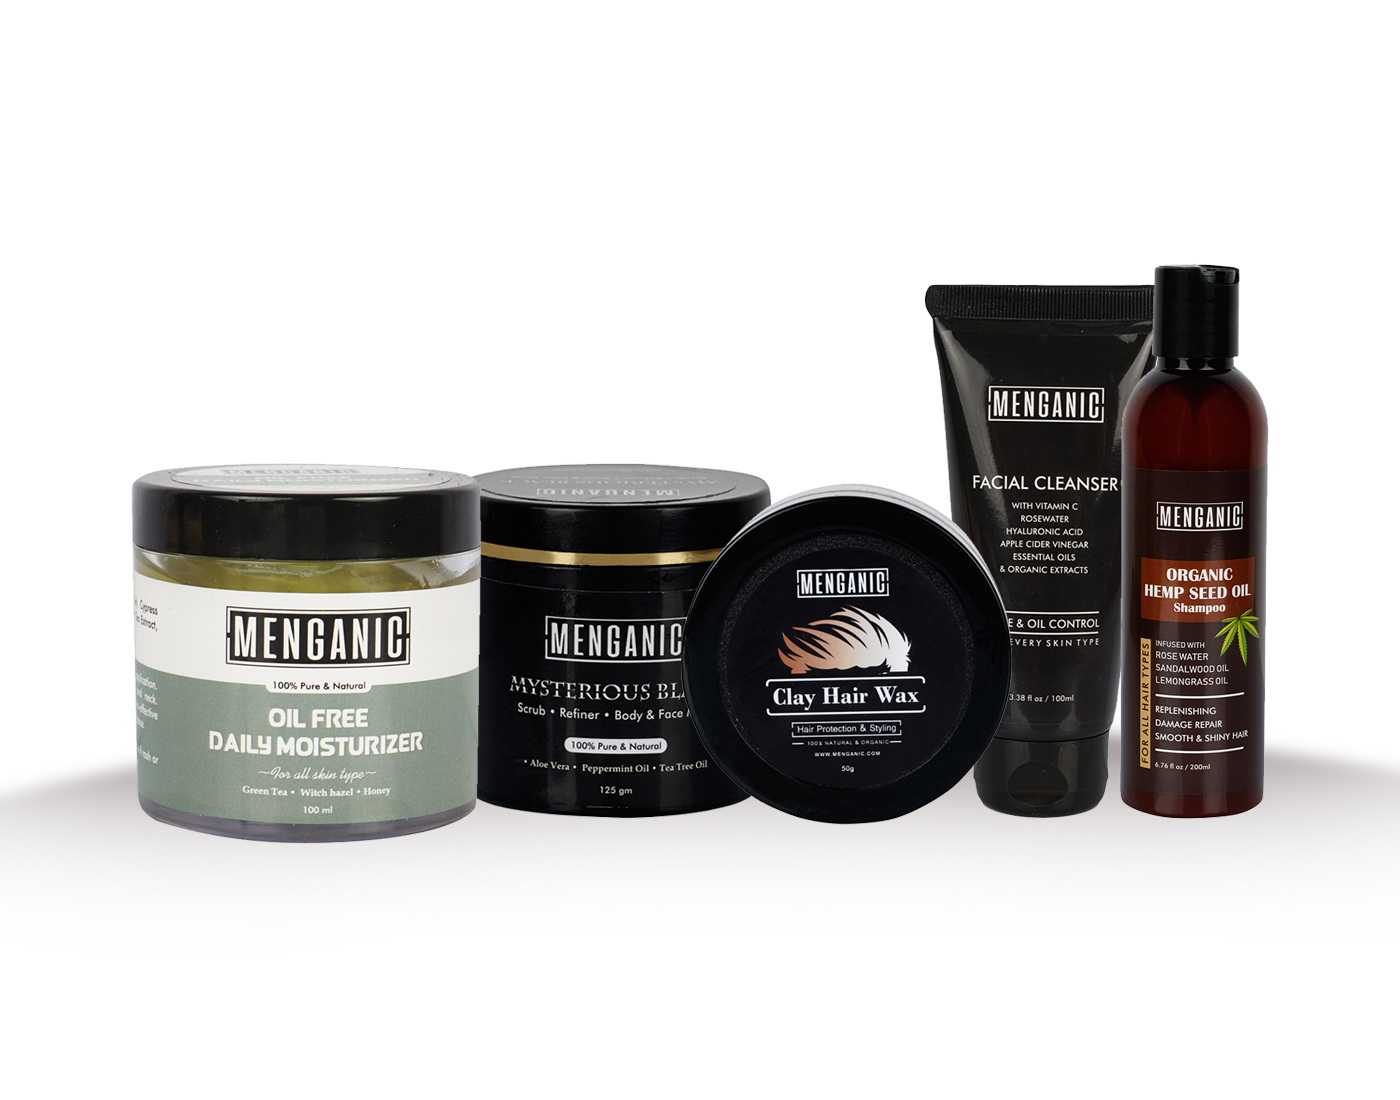 Men’s grooming products get a local address